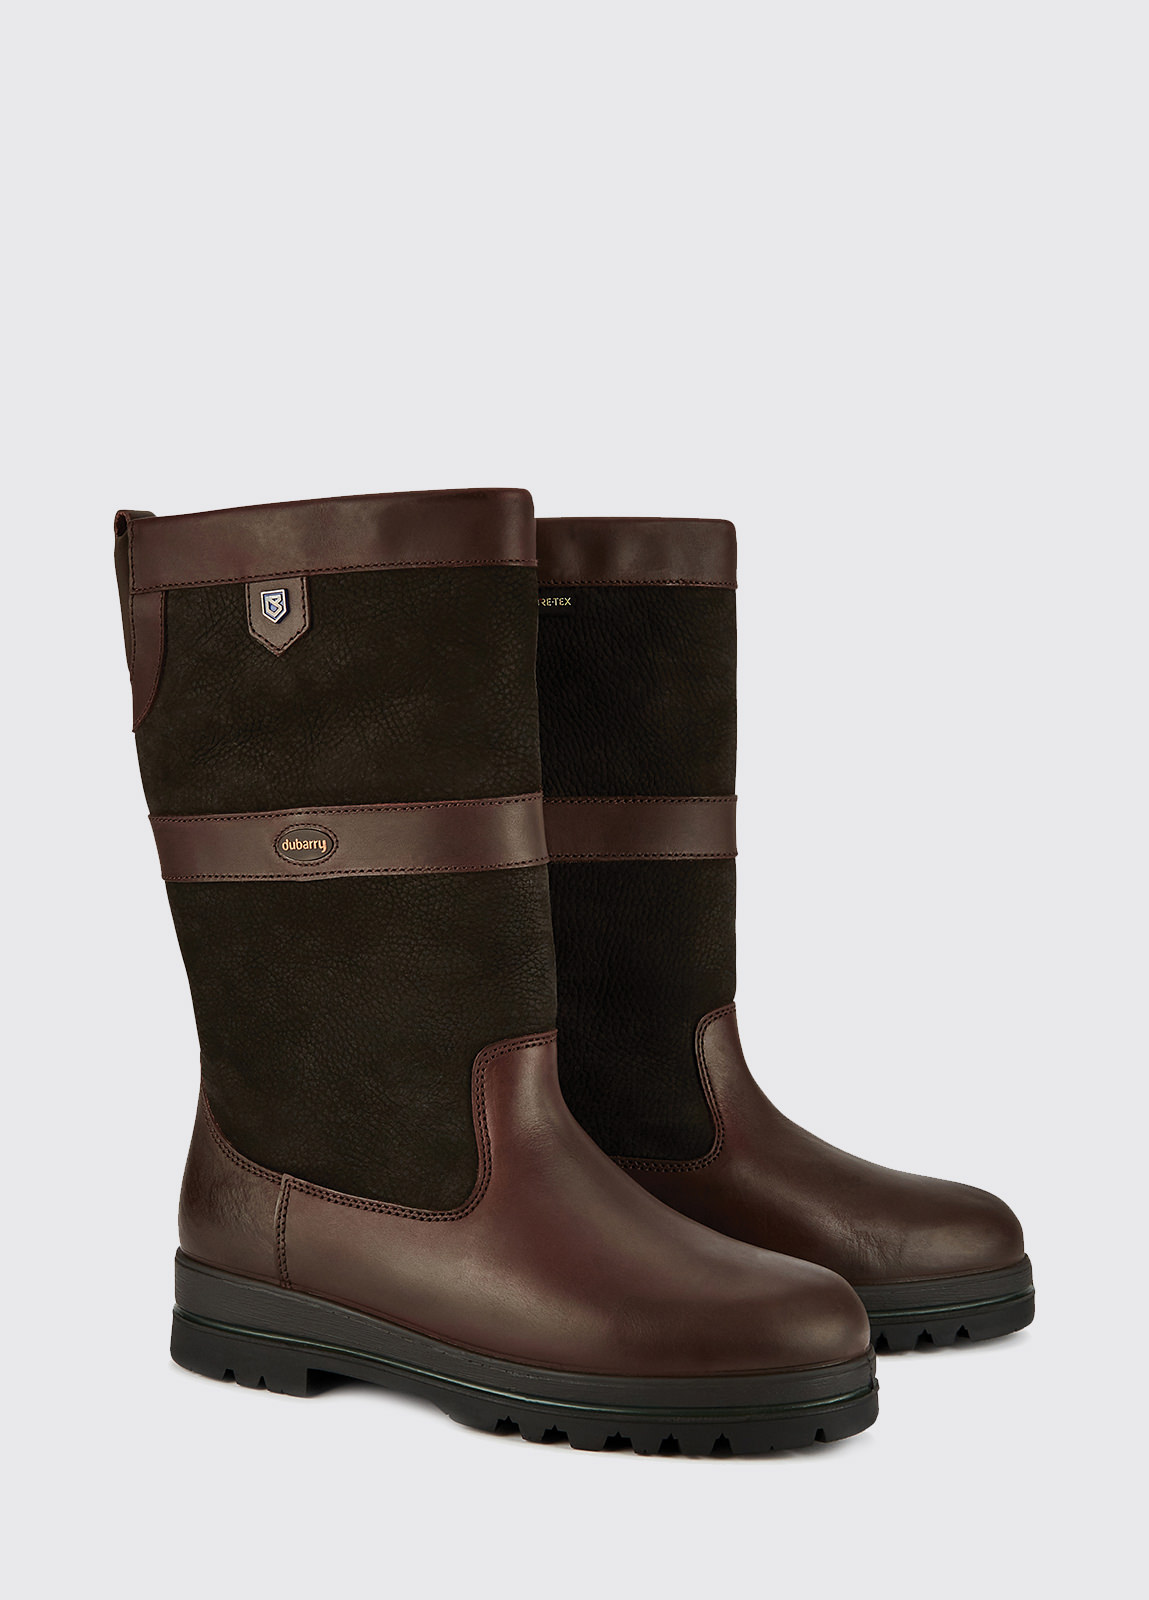 A pair of Dubarry Donegal Country Boot, black and brown leather ski style boot with finger pull